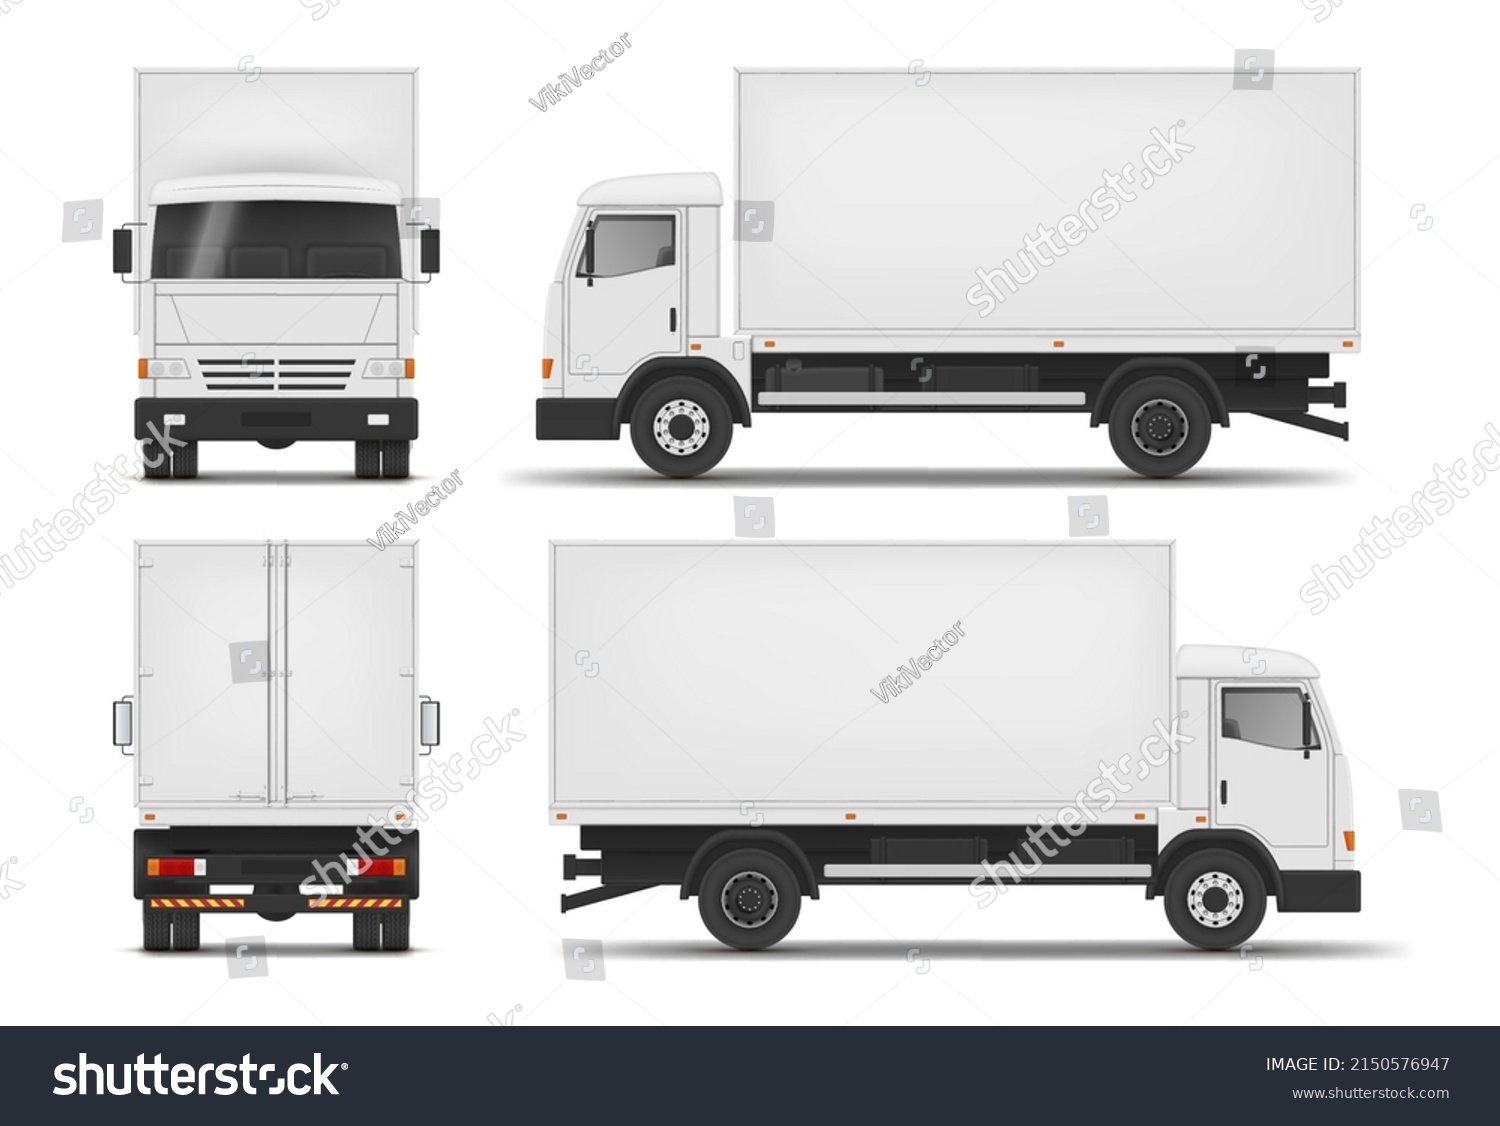 SVG of Collection realistic light truck front back and side view vector illustration. Set lorry van with box cargo logistic transportation service. Commercial freight delivery industrial machinery vehicle svg